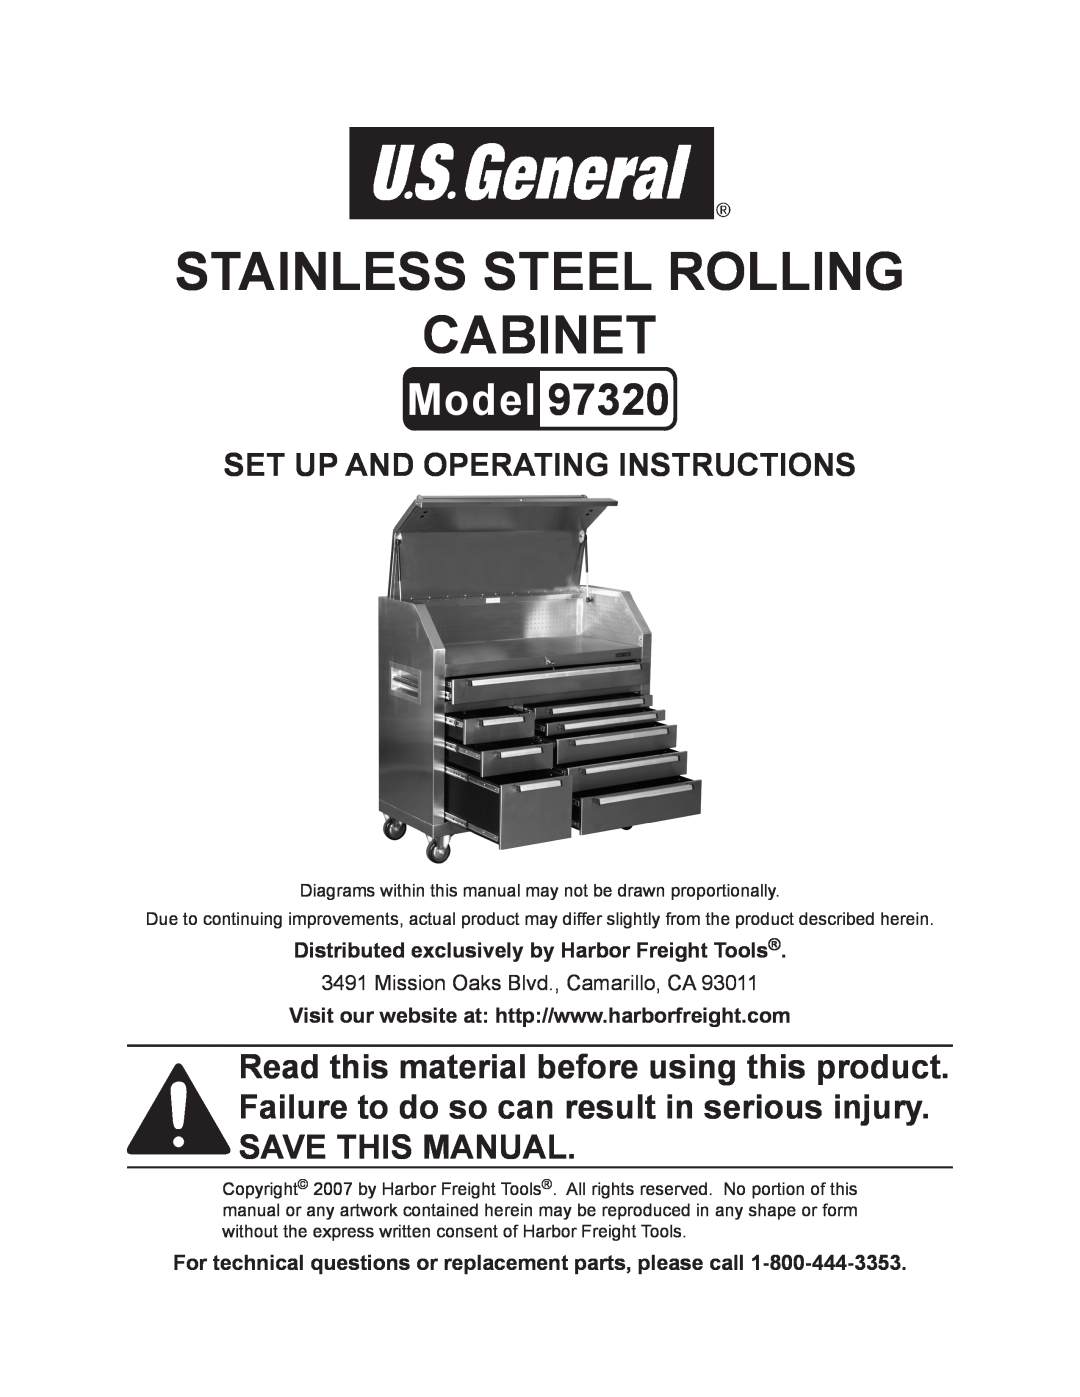 Harbor Freight Tools 97320 manual Stainless steel rolling cabinet, Model, Set up And Operating Instructions 